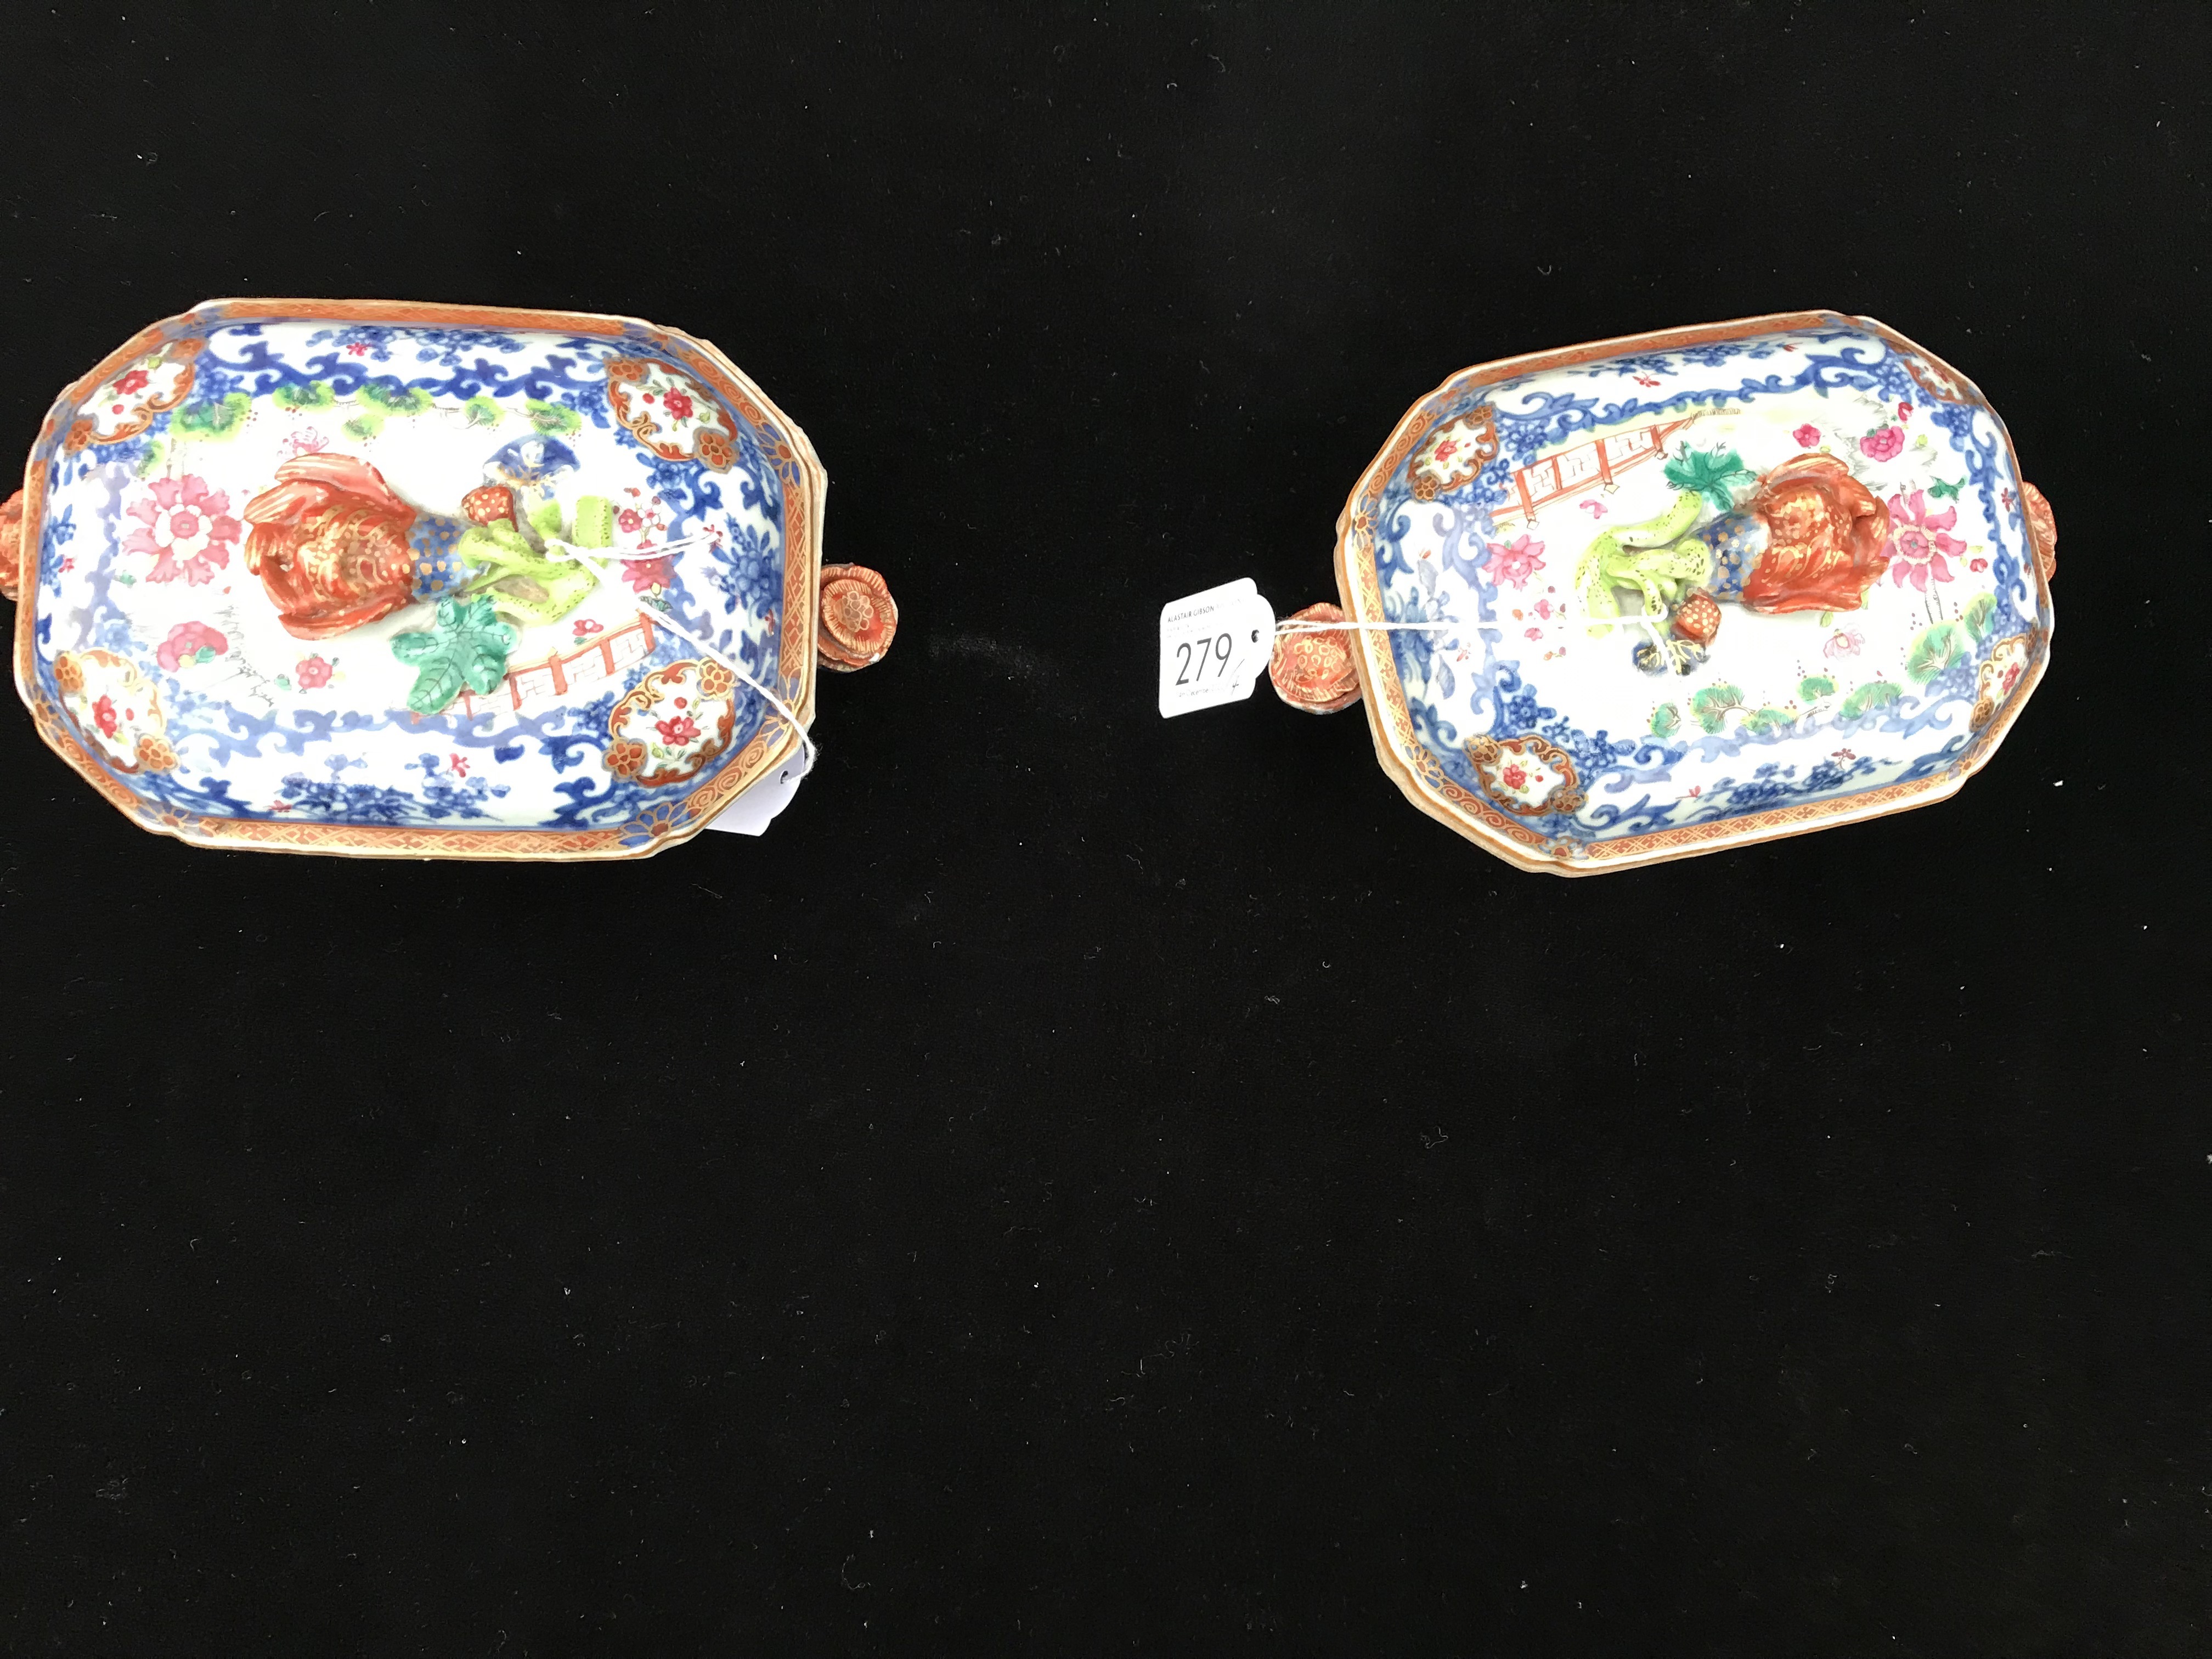 A PAIR OF CHINESE EXPORT ‘FAMILLE-ROSE’ PORCELAIN SMALL TUREENS & COVERS, QIANLONG PERIOD 1736–1795 - Image 2 of 4